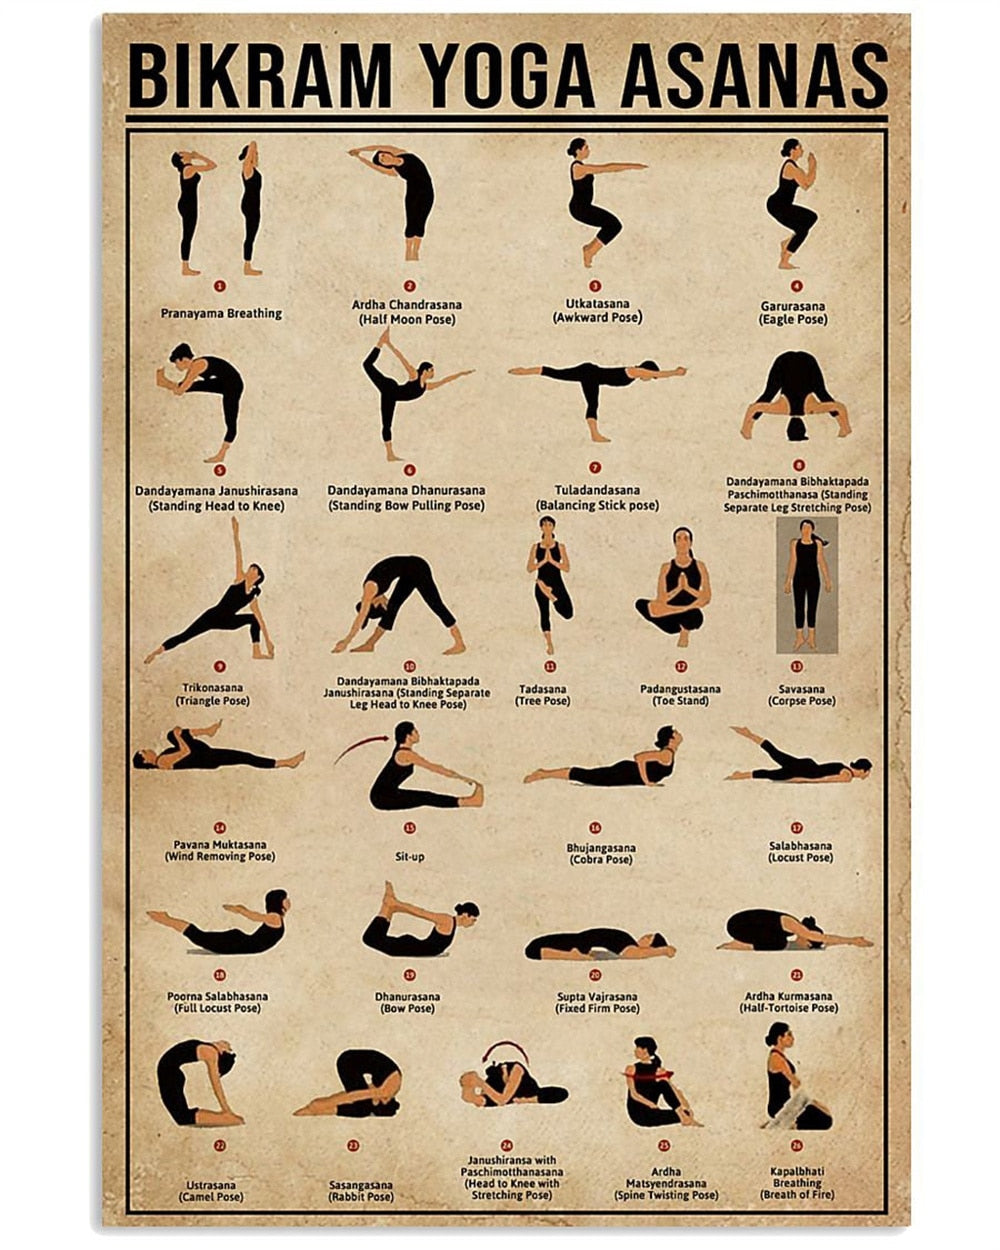 7 Chakras Knowledge Poster Yoga Chakra Awakening Vintage Print Knowledge Canvas Painting Modern Wall Art Pictures Home Decor - 20X30cm no frame / TP492-2 - 30X40cm no frame / TP492-2 - 40X60cm no frame / TP492-2 - 50X70cm no frame / TP492-2 - 60X90cm no frame / TP492-2 - 40X50cm no frame / TP492-2 - 20X30cm with Frame / TP492-2 - 30X40cm with Frame / TP492-2 - 40X60cmX DIY Frame / TP492-2 - 50X70cmX DIY Frame / TP492-2 - 60X90cmX DIY Frame / TP492-2